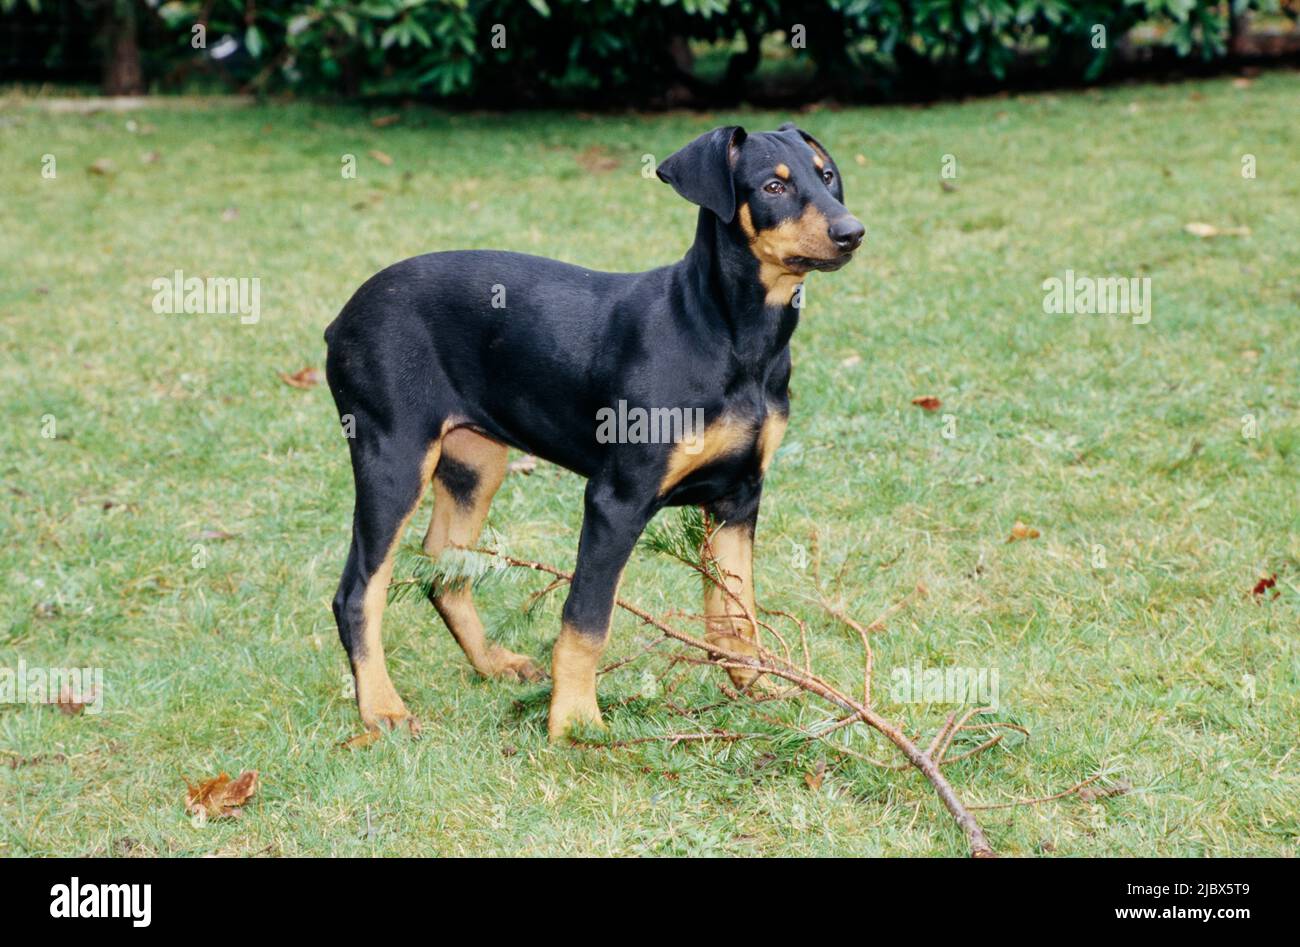 A Doberman in grass standing over a stick Stock Photo